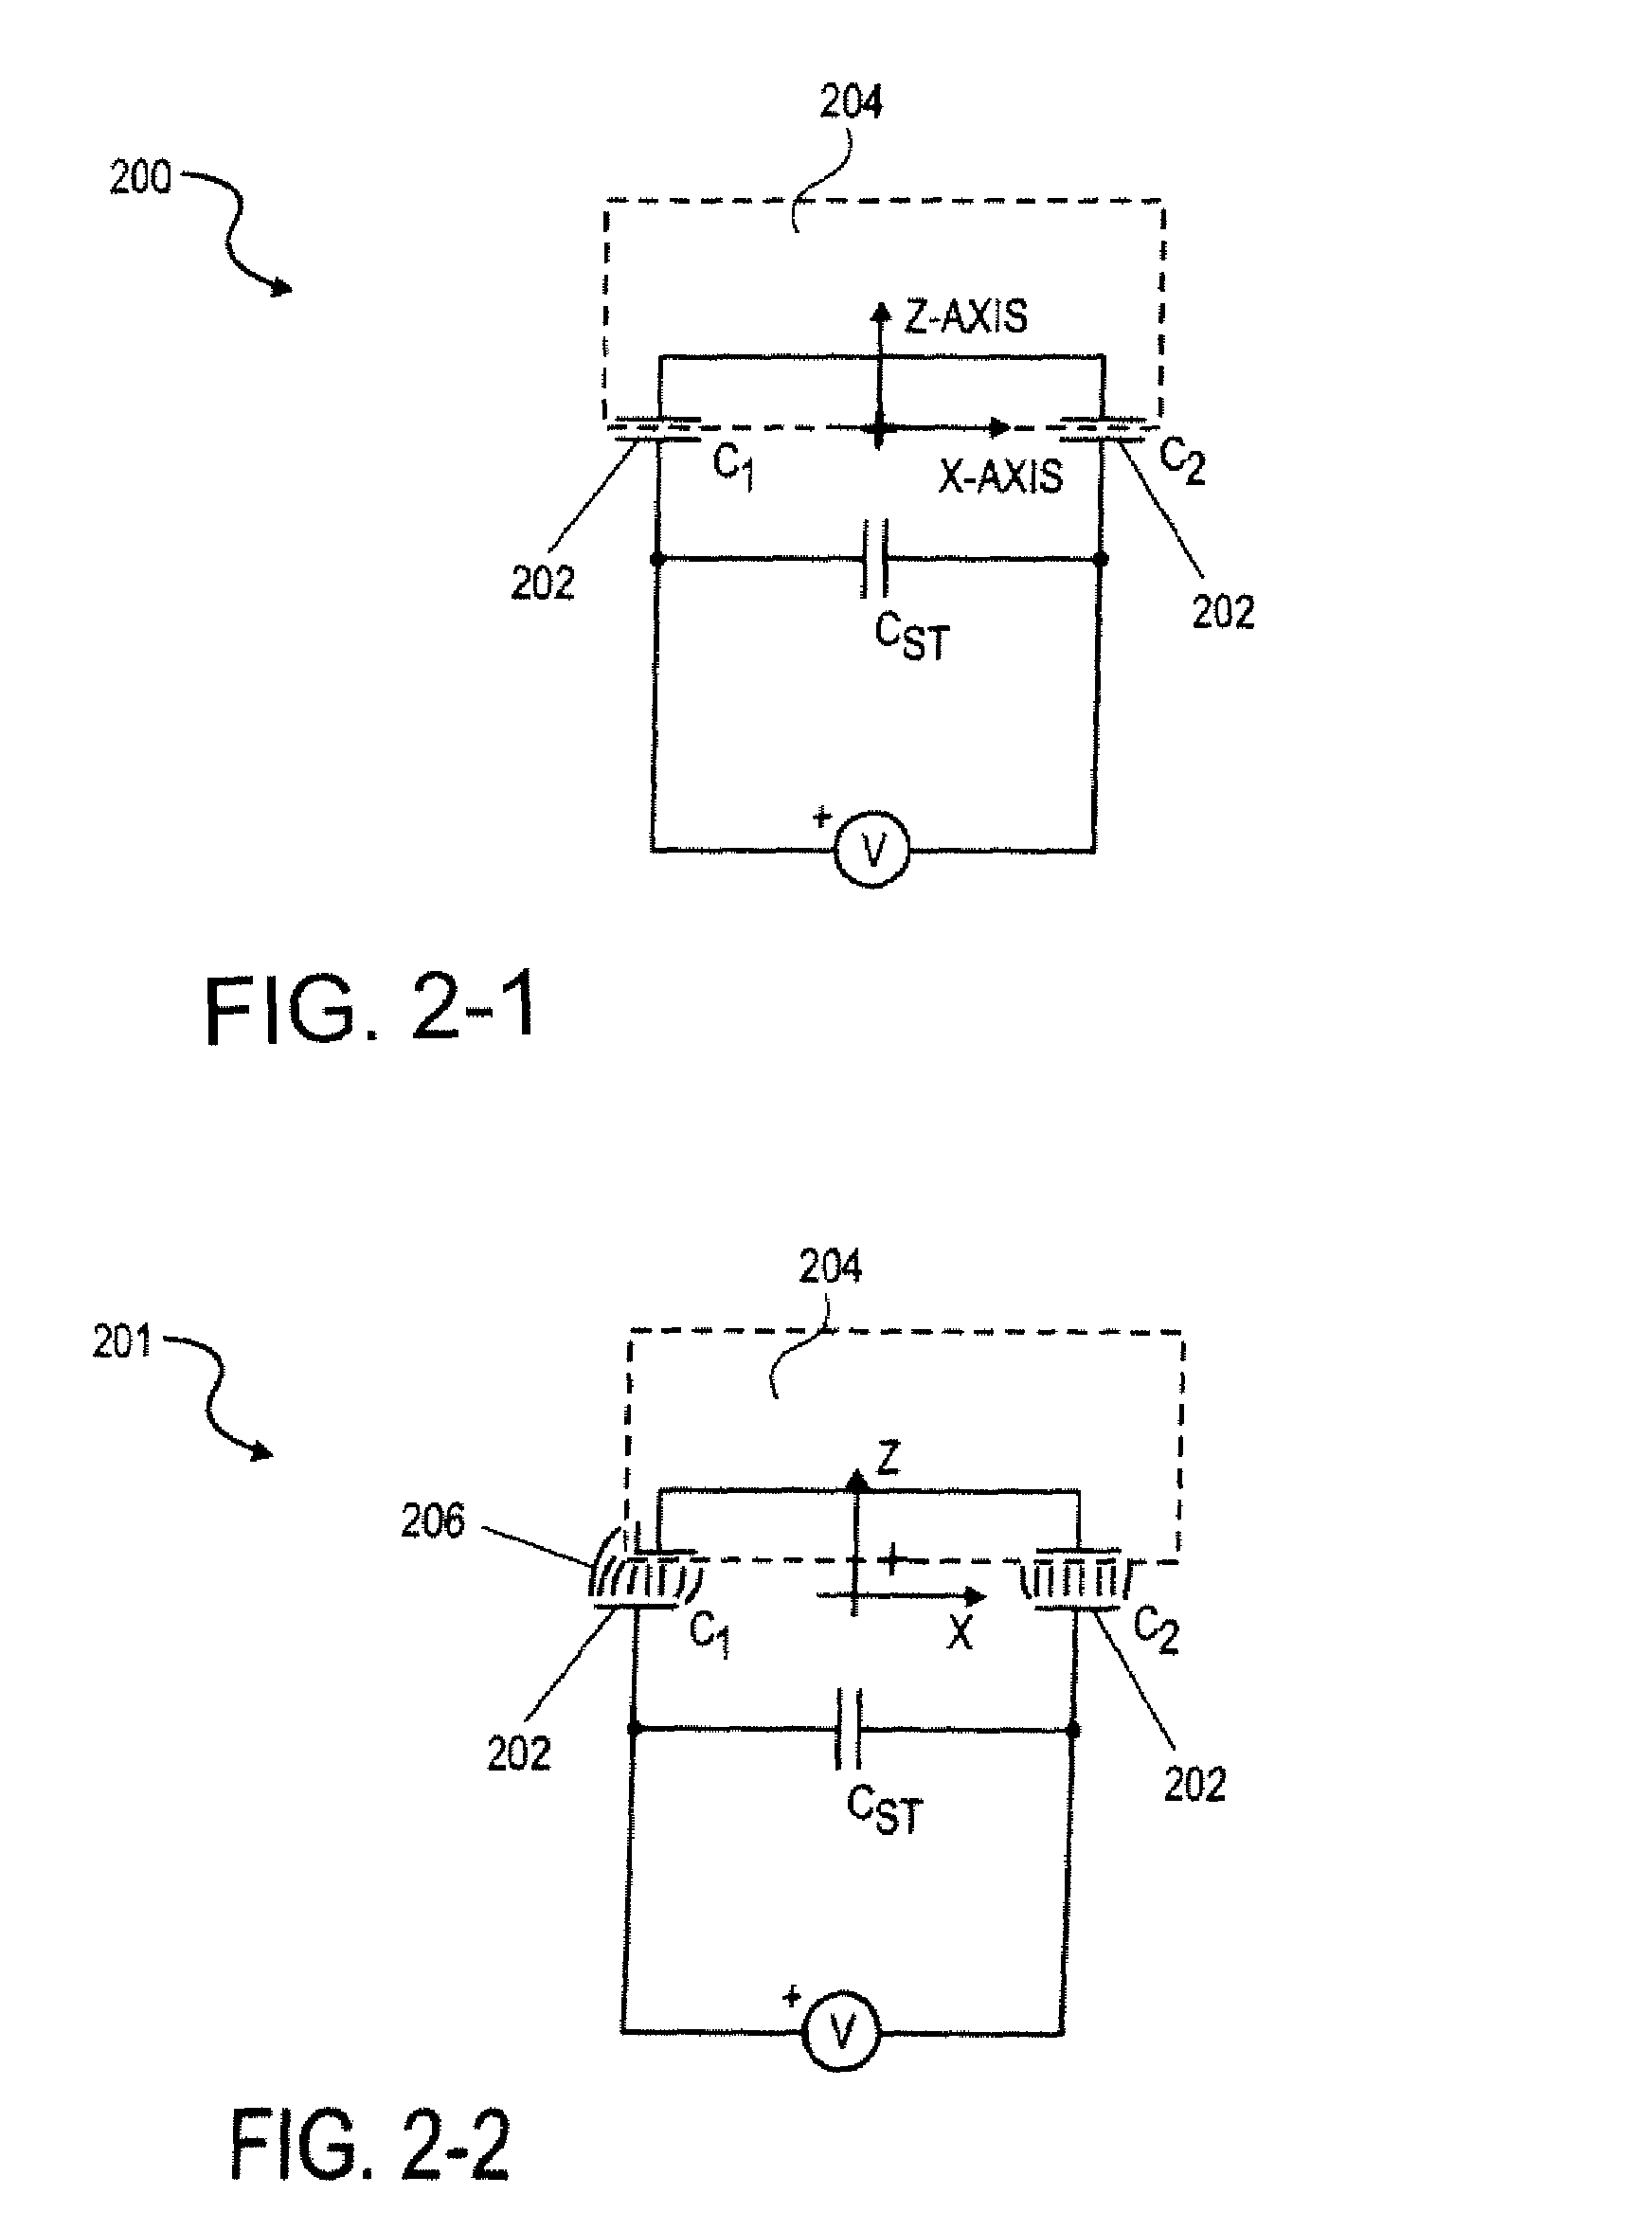 Method and apparatus for self-assembly of functional blocks on a substrate facilitated by electrode pairs